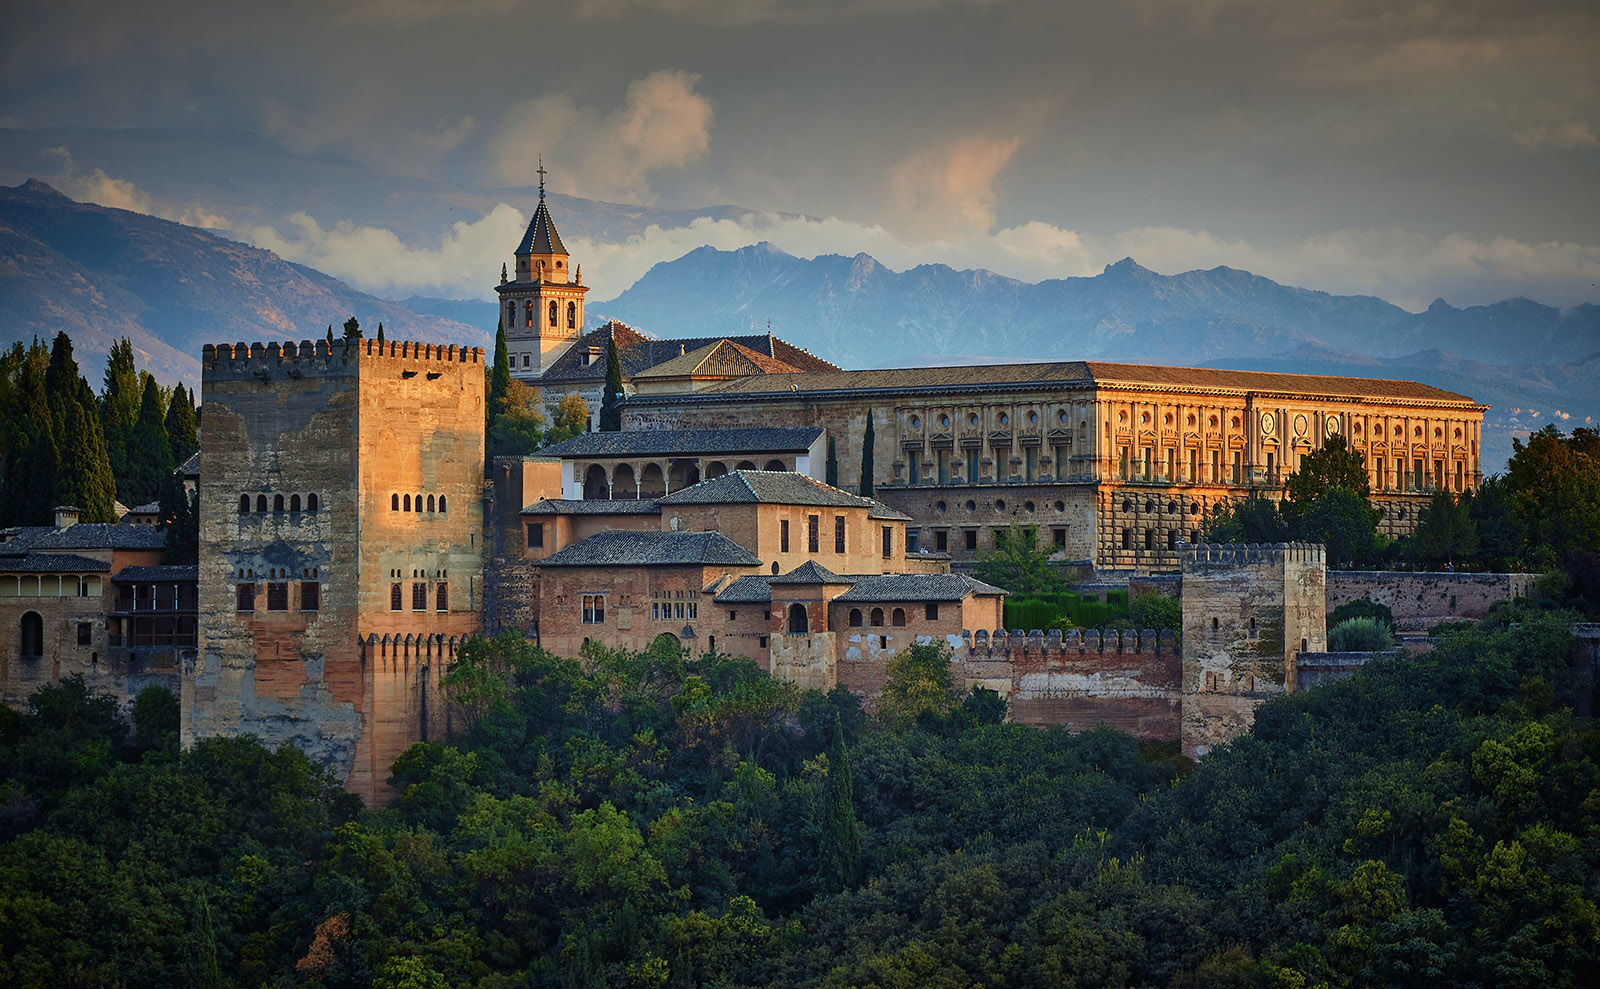 Poems by Théophile Gautier and Emma Lazarus About the Beauty of the Alhambra